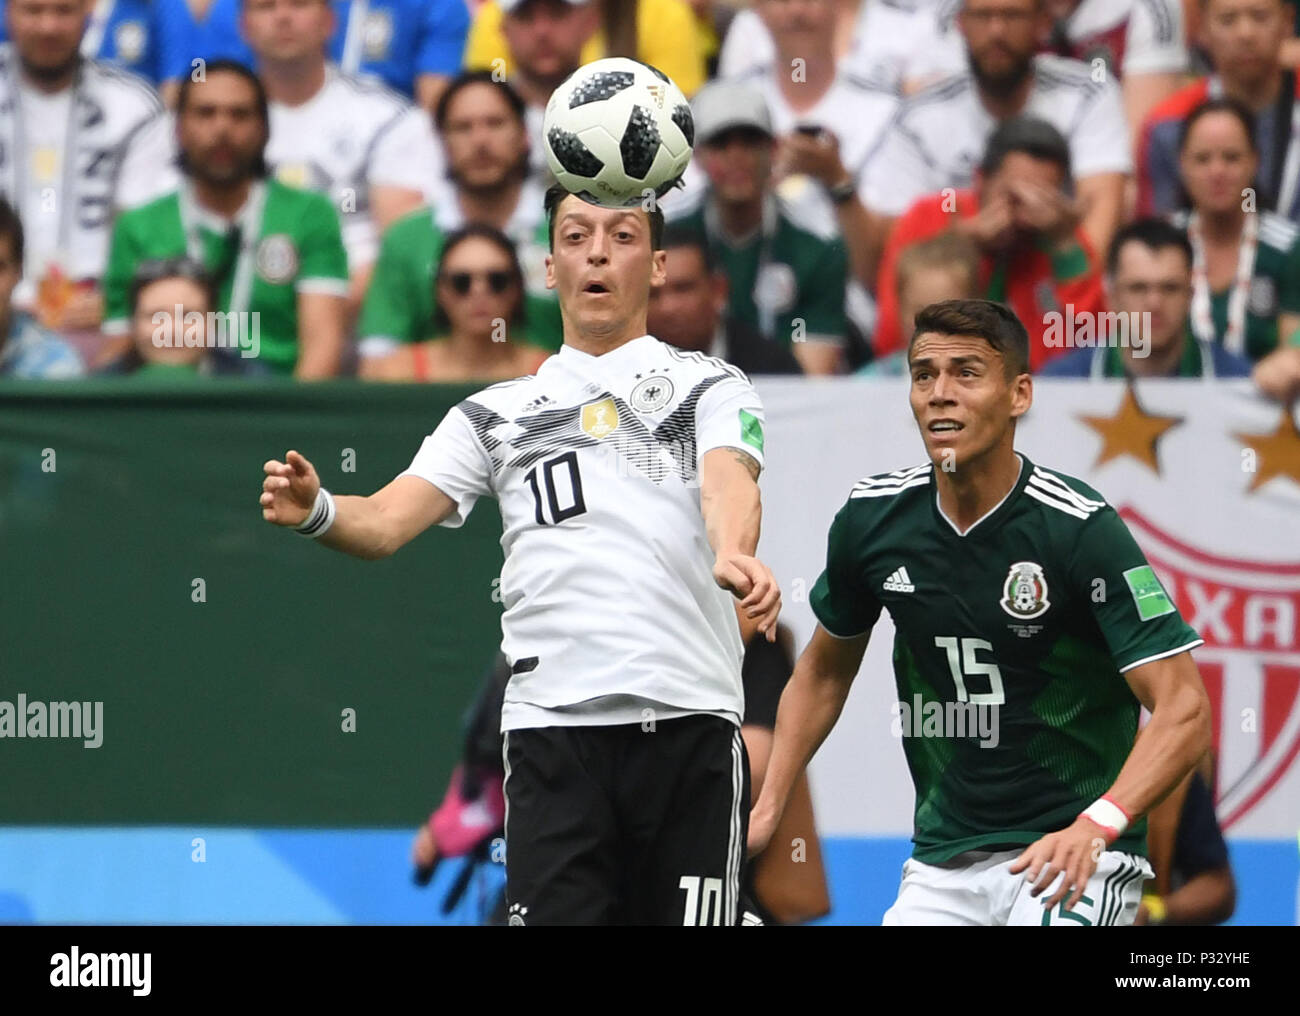 Moscow, Russia, 17 June 2018, , Soccer, FIFA World Cup, Group F, Matchday 1 of 3, Germany vs Mexico at the Luzhniki Stadium: Mesut Ozil of Germany and Hector Moreno (R) aus Mexico vie for the ball. Photo: Federico Gambarini/dpa Credit: dpa picture alliance/Alamy Live News Credit: dpa picture alliance/Alamy Live News Stock Photo